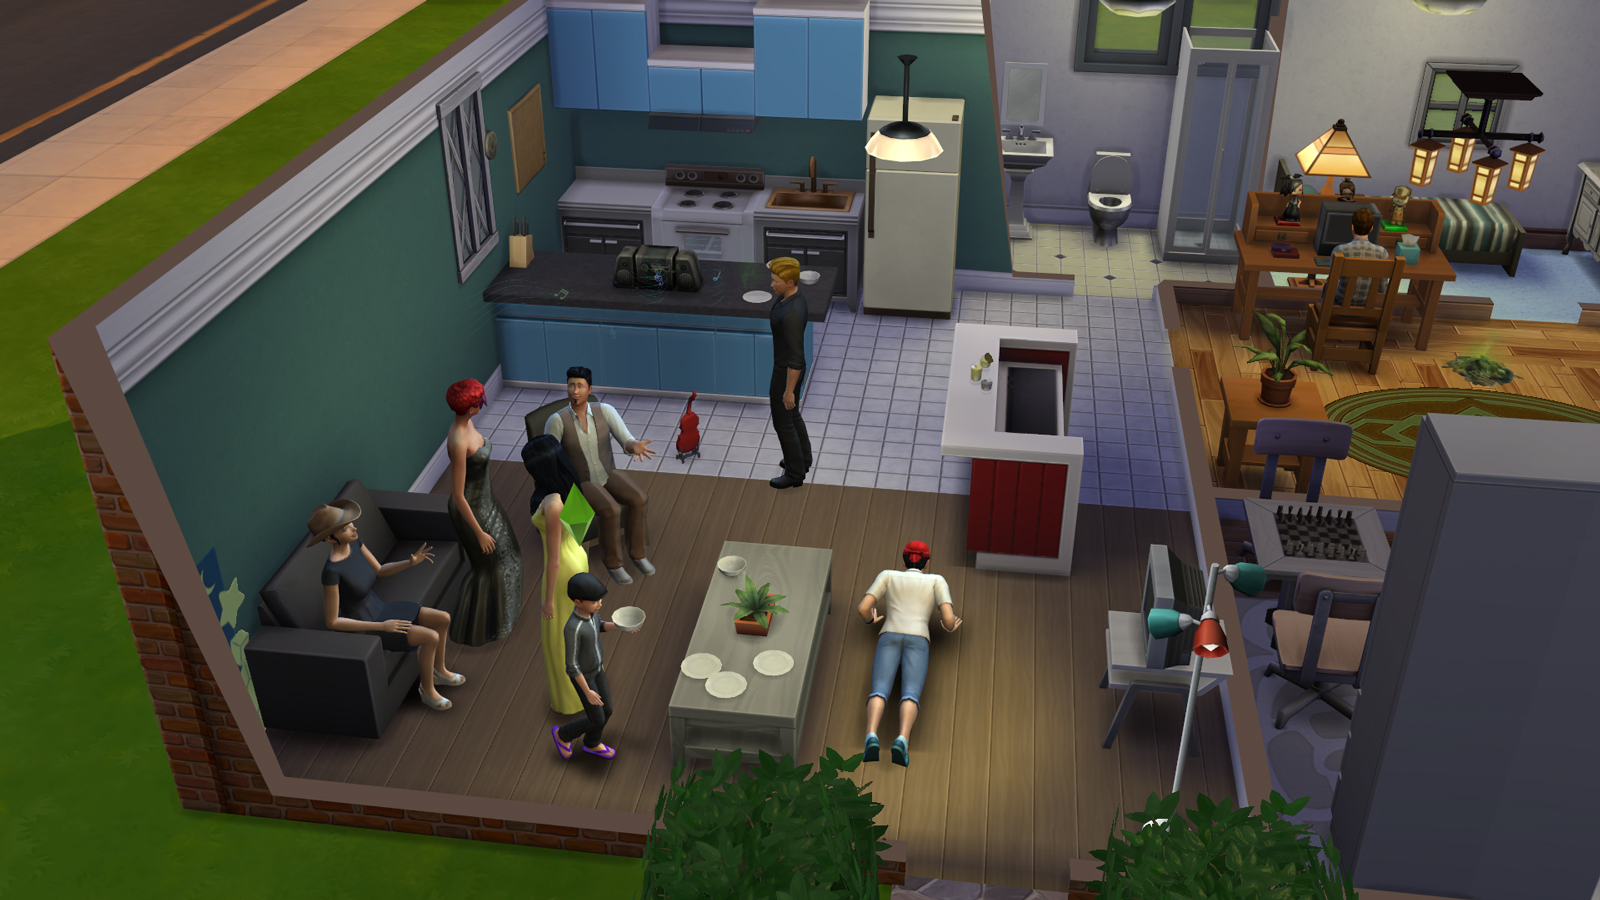 the sims 4 reloaded tpb